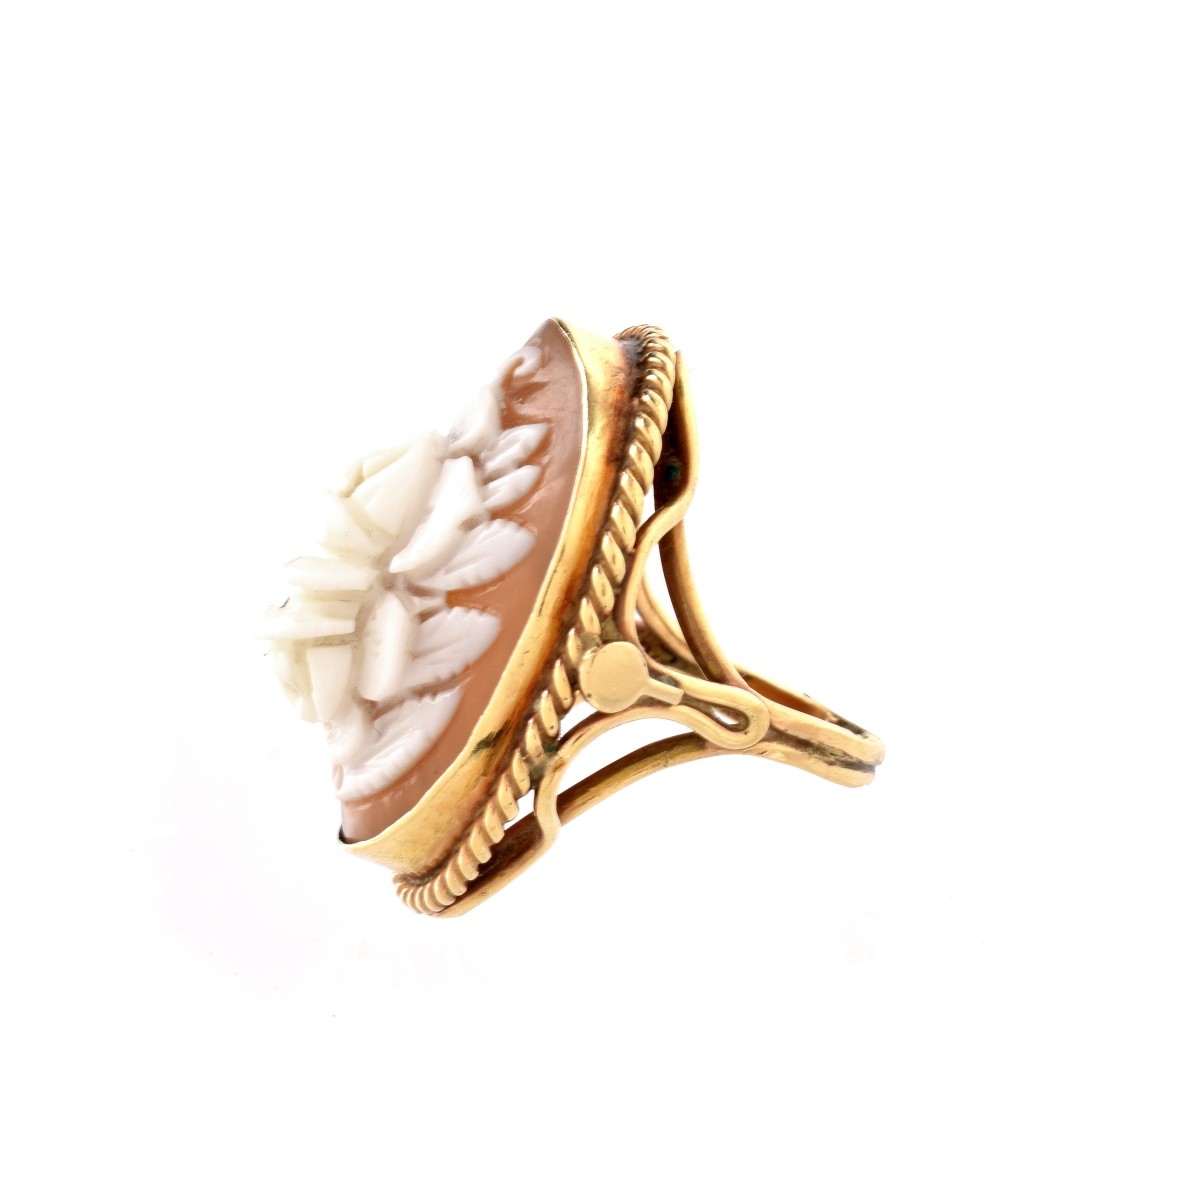 Shell Cameo and 14K Ring